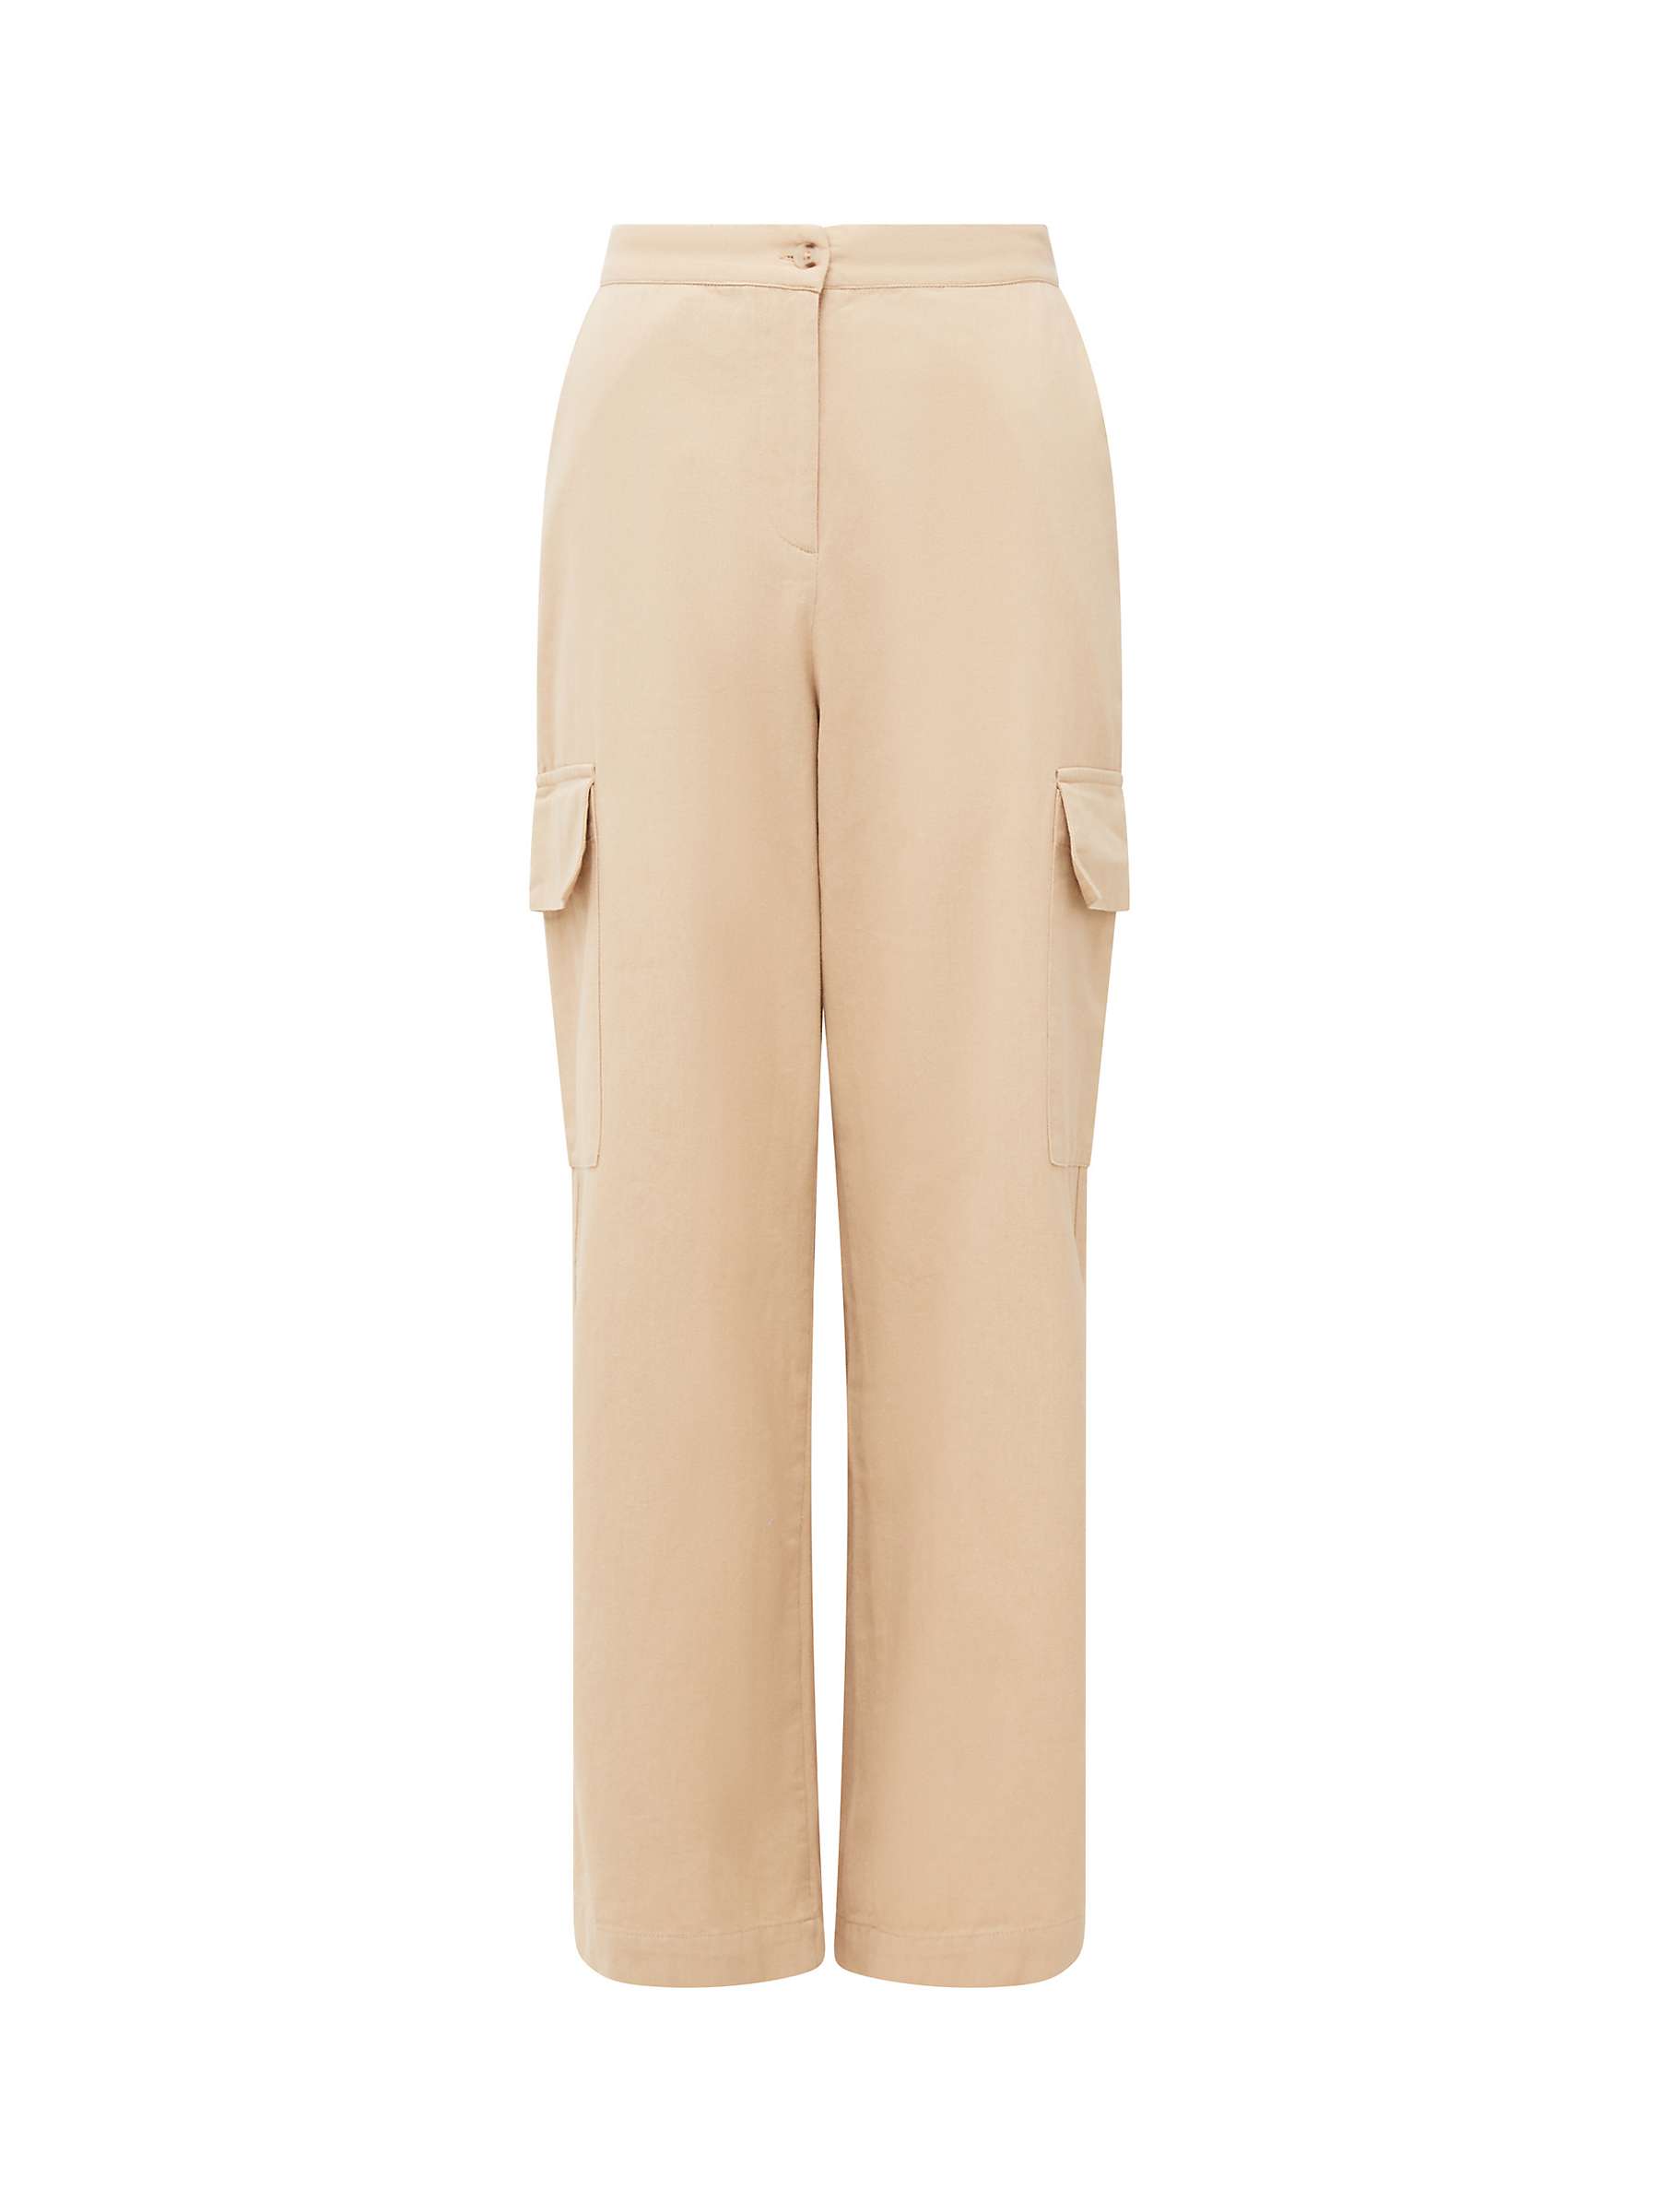 Buy Great Plains Cotton Utility Trousers, Sand Online at johnlewis.com